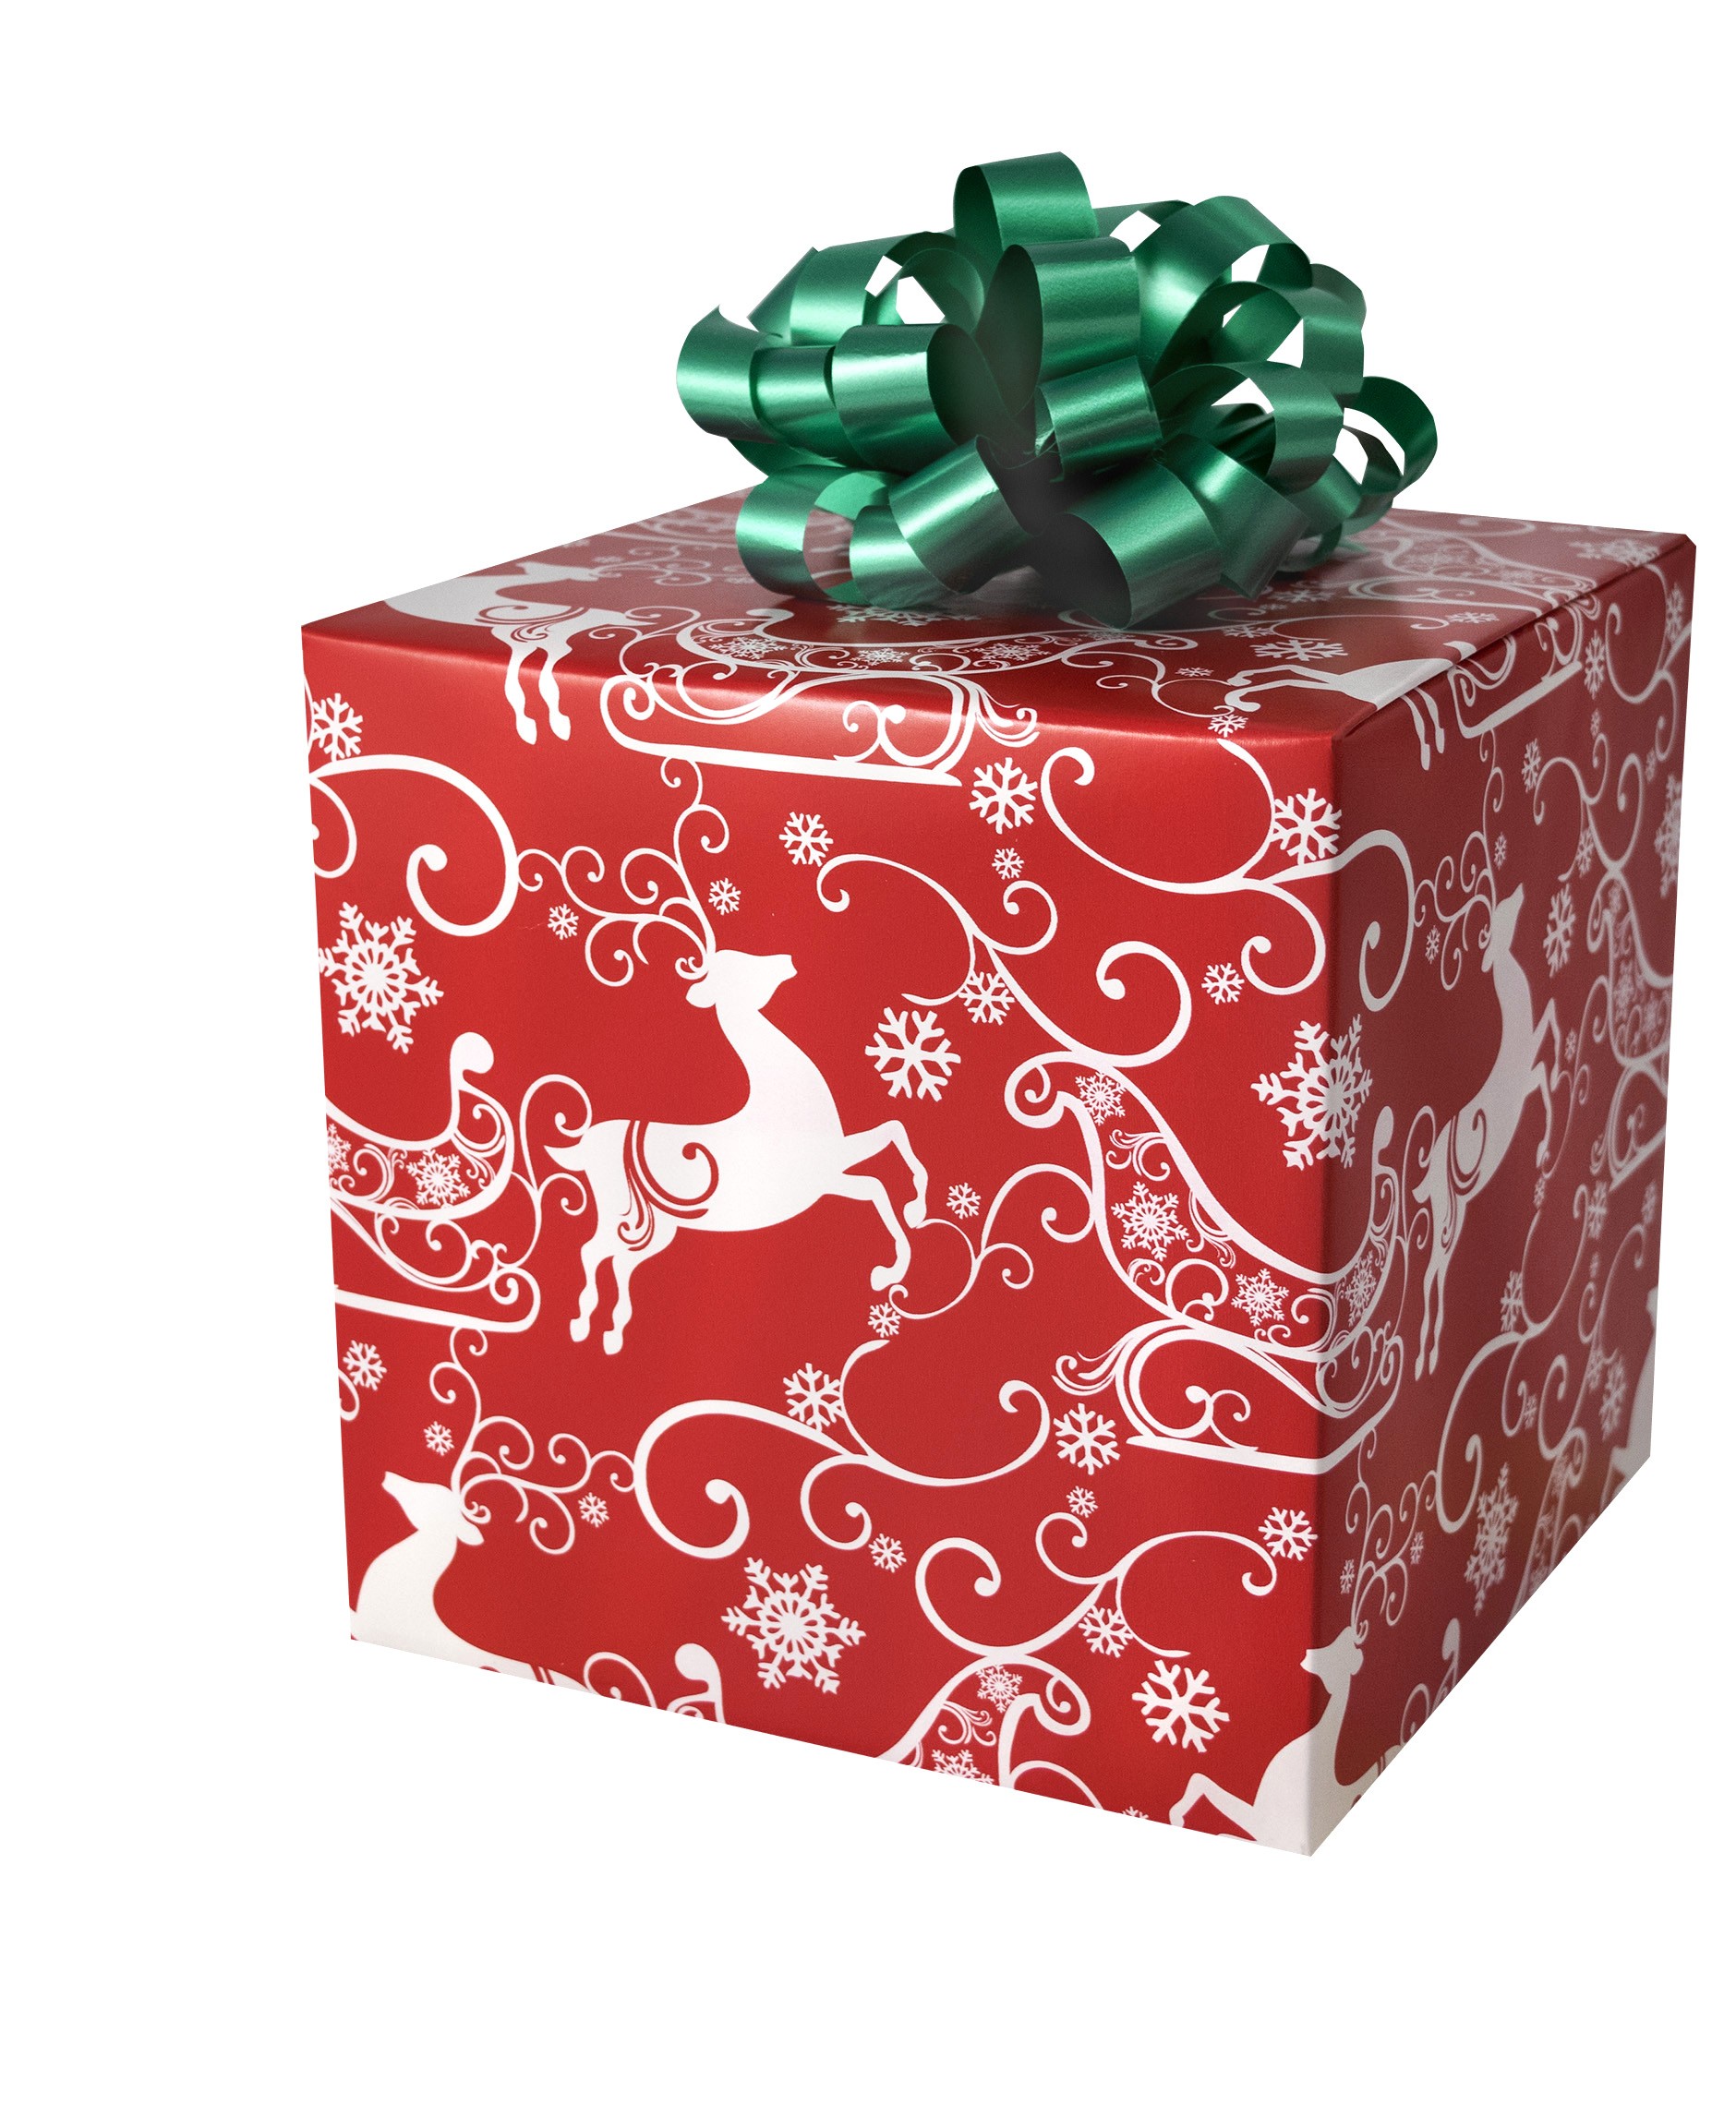 Sleigh Ride Gift Wrap - Wrapping Paper